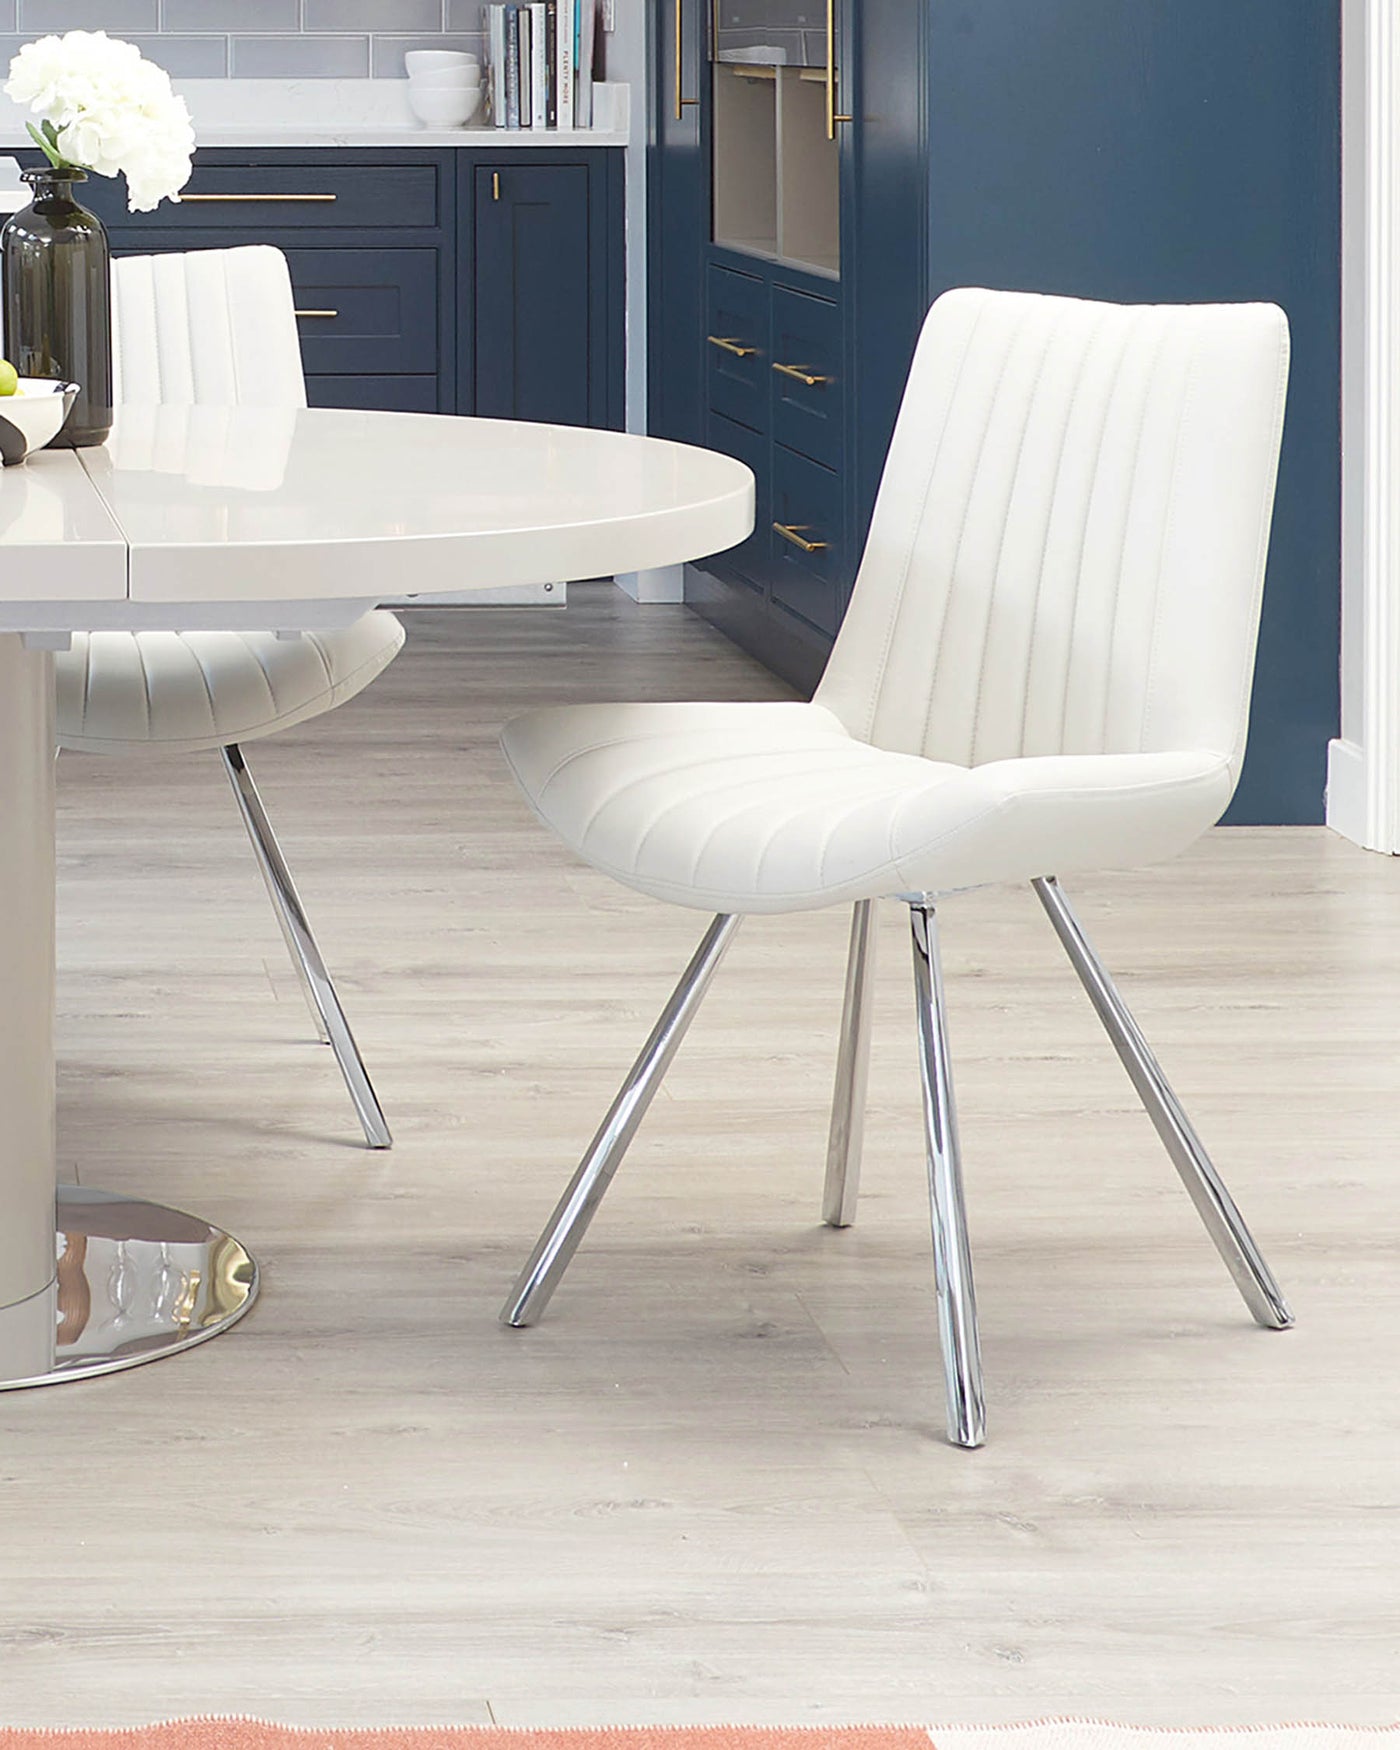 Modern white oval dining table with a sleek, reflective surface, complemented by two elegant white dining chairs featuring horizontal channel tufting and polished chrome legs. The chairs have a curved, shell-like seat design that provides both comfort and contemporary aesthetic.